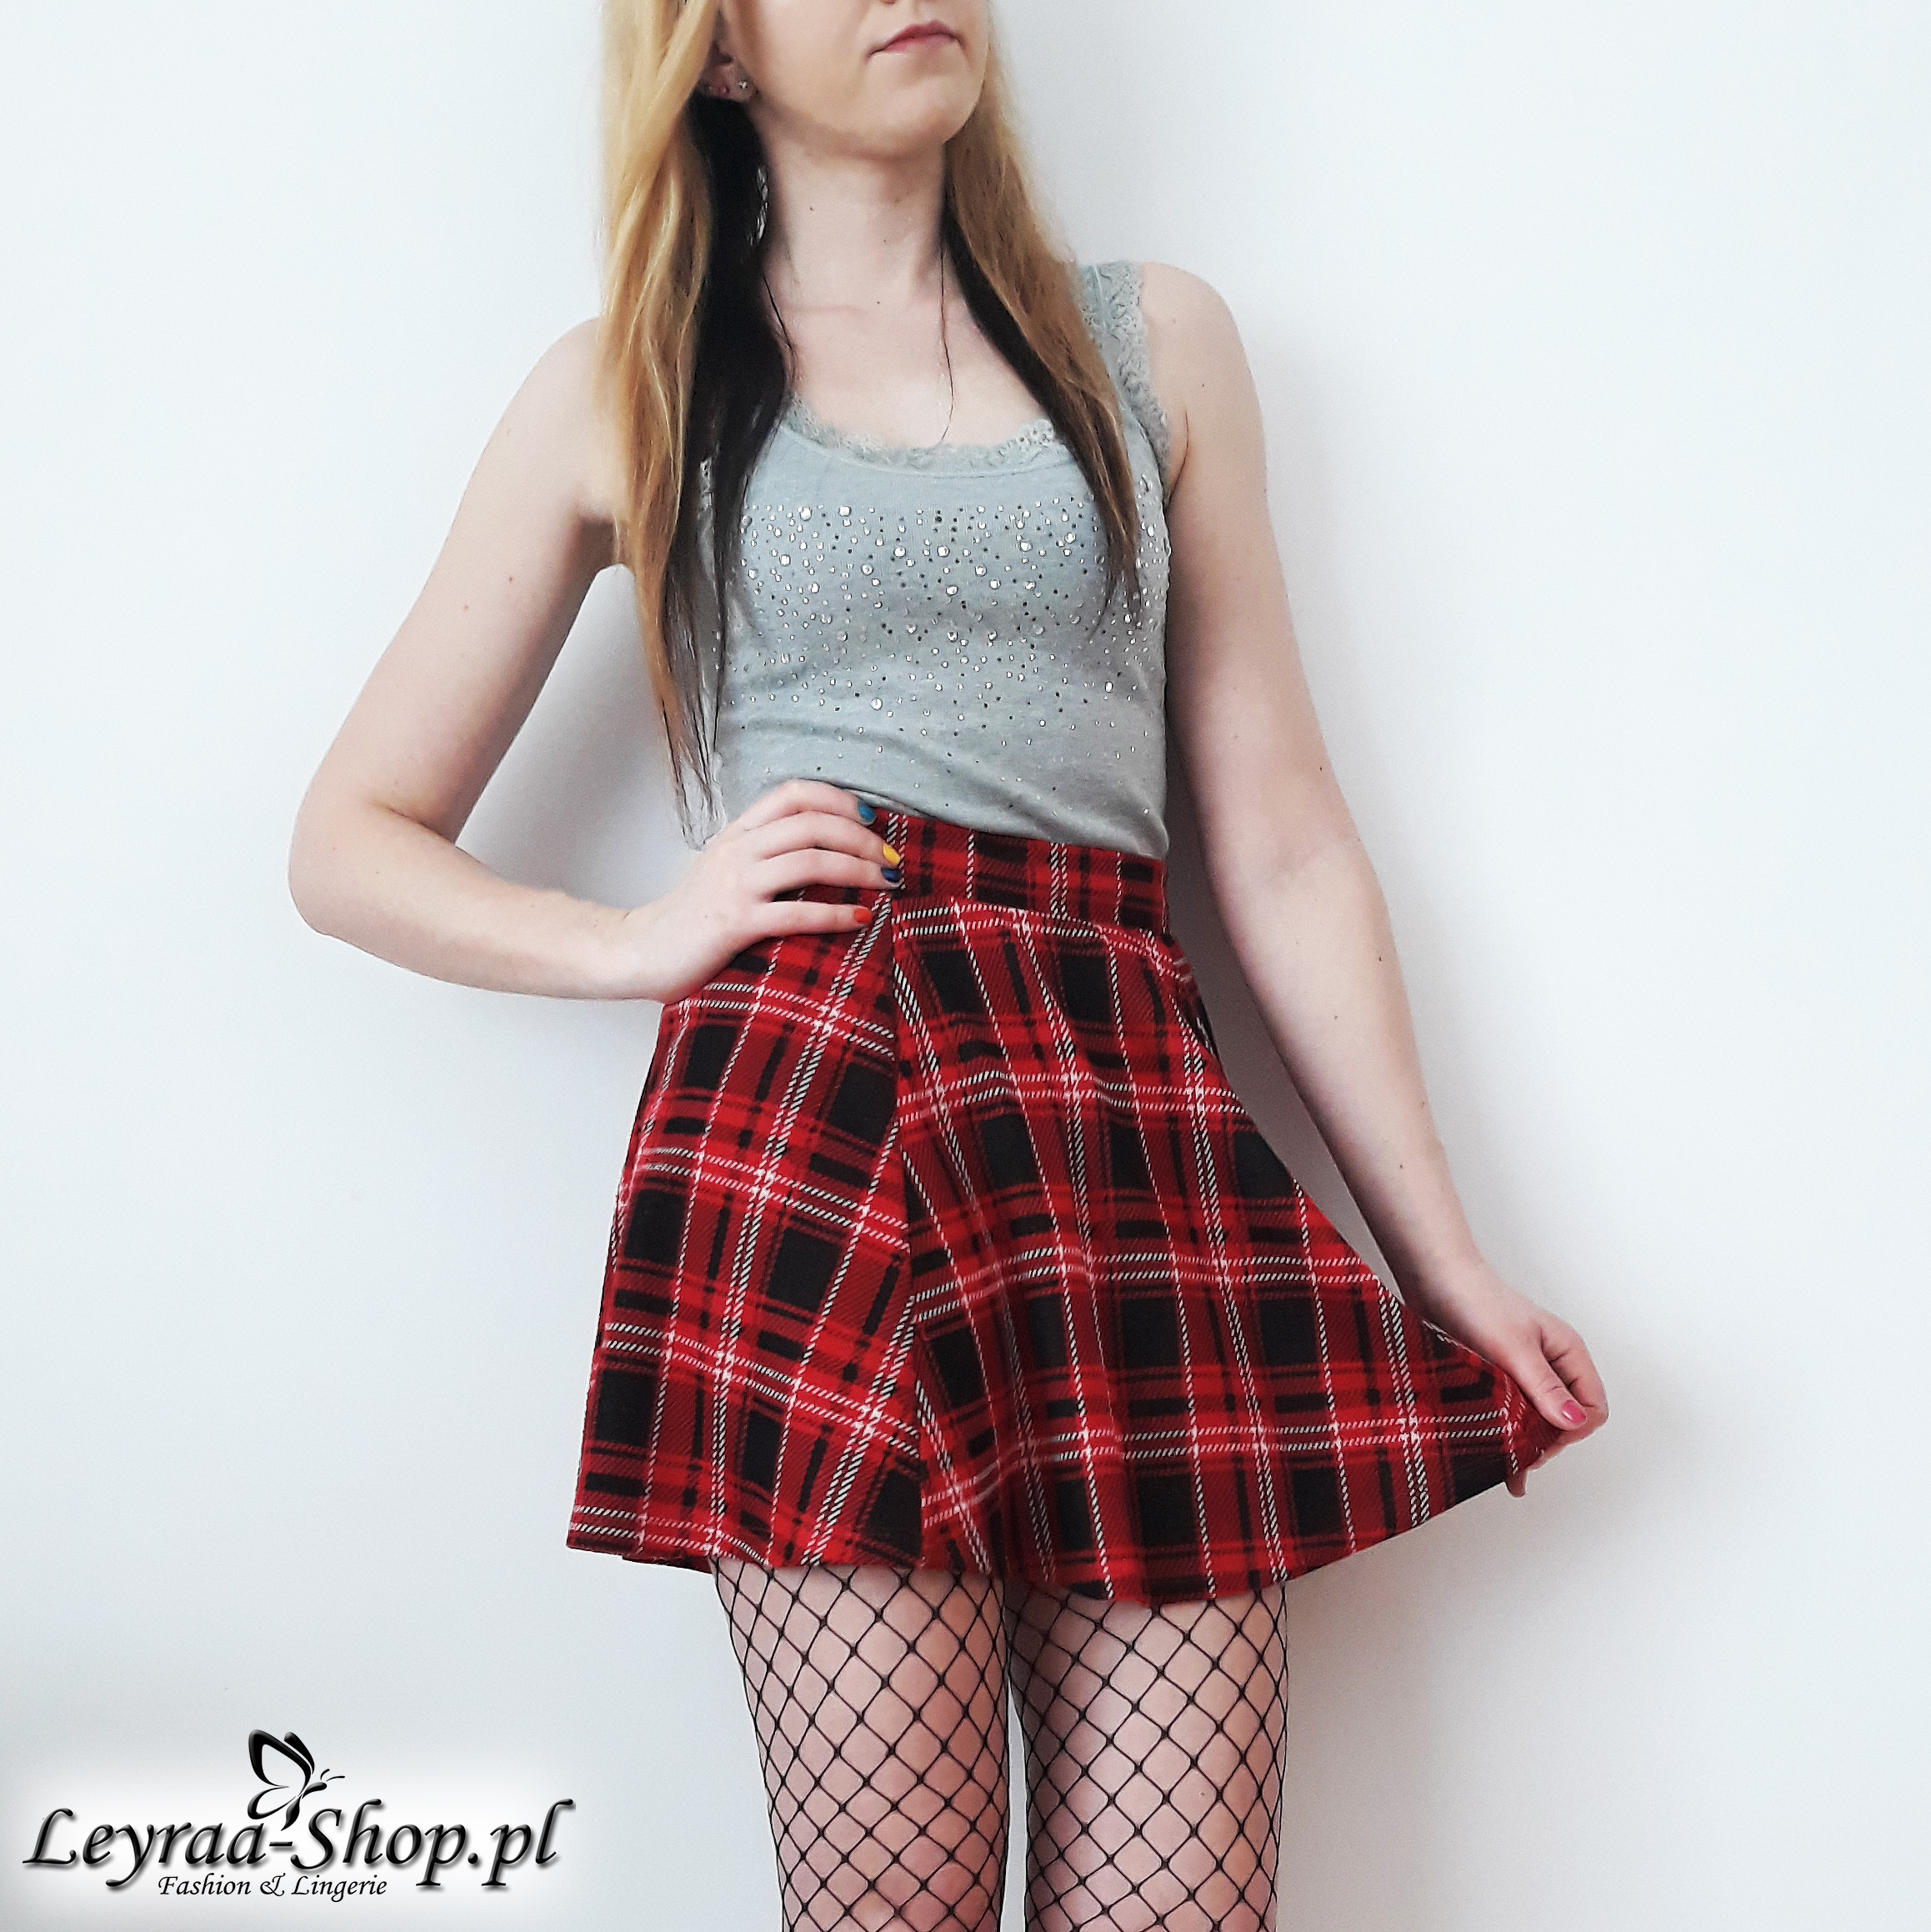 Fishnet tights, gray boxer shorts with rhinestones, flared red checkered skirt, black high heels